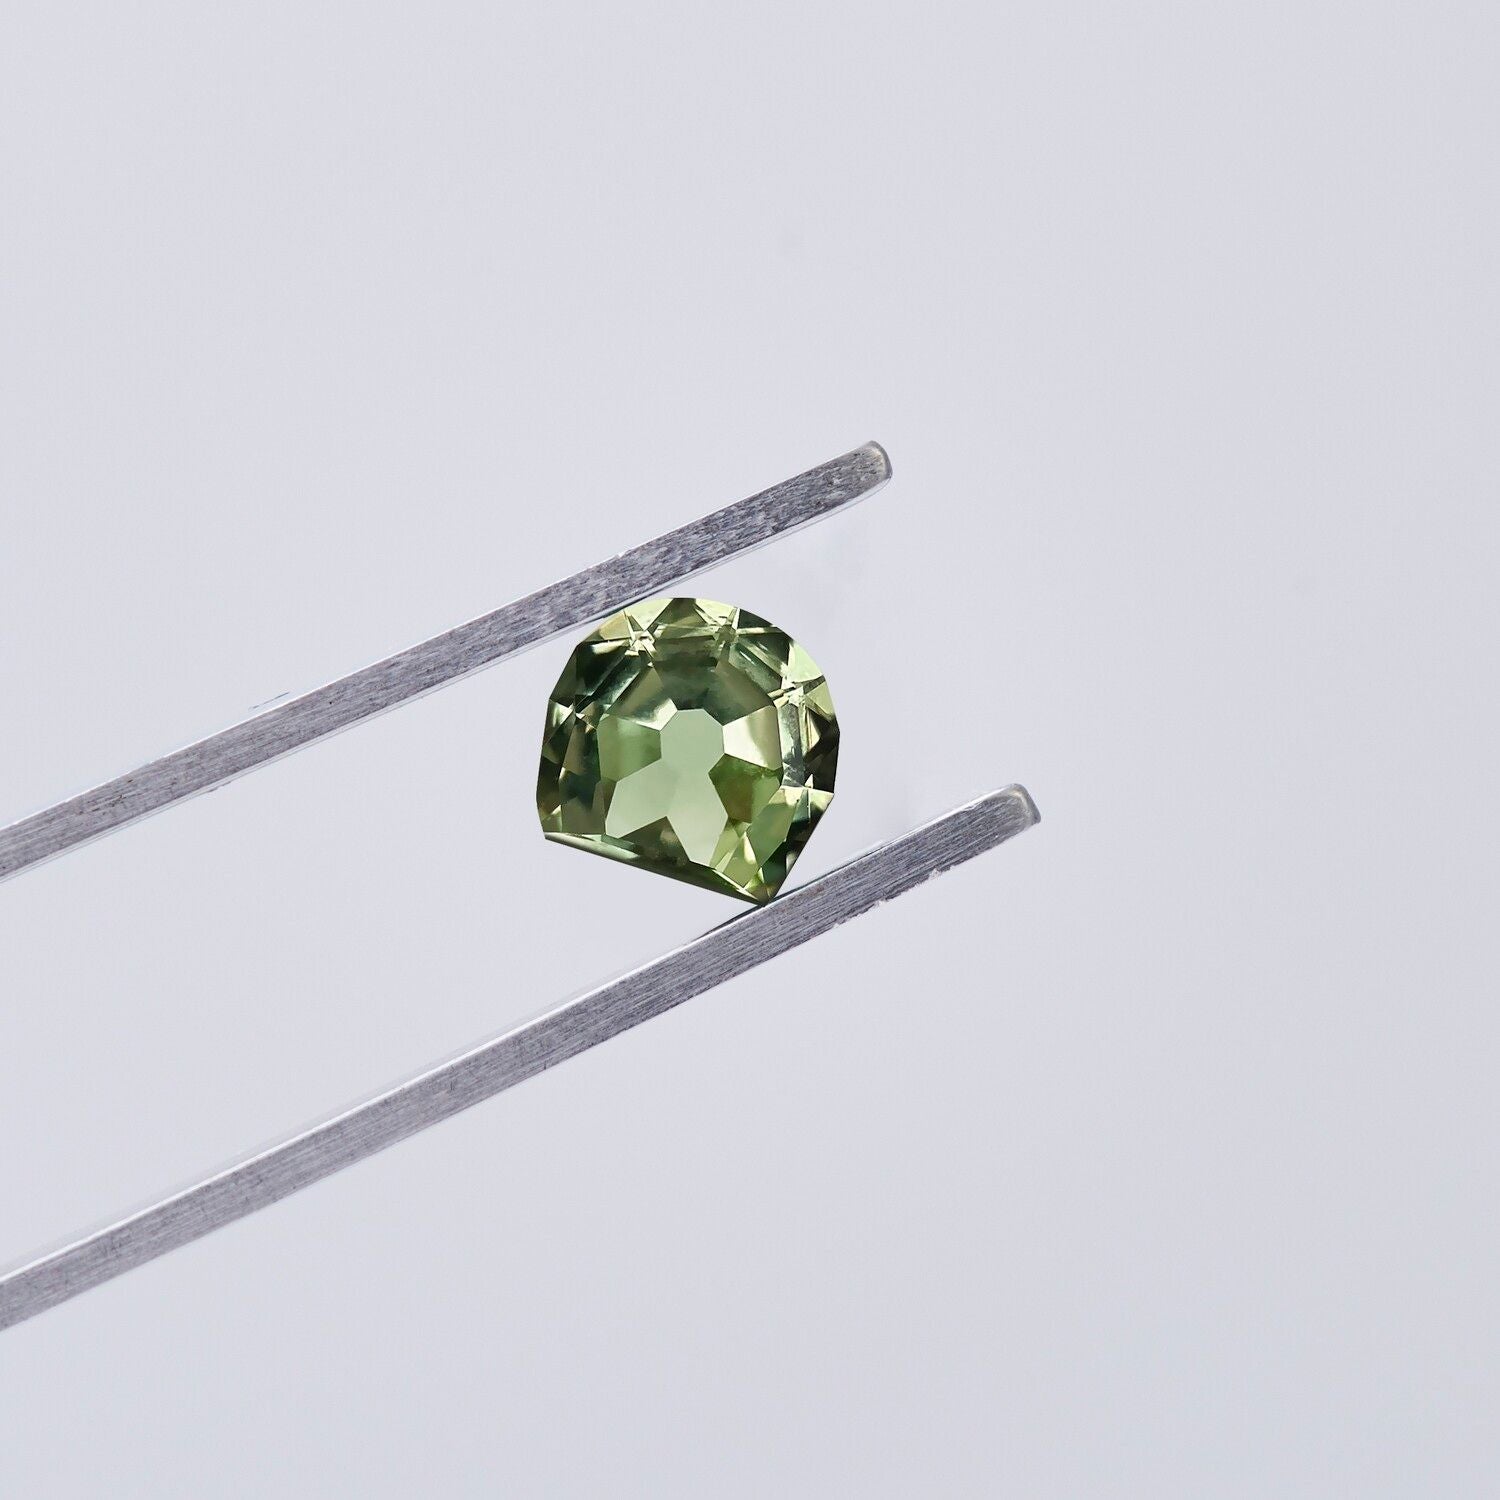 Lock in Your Luck Pendant with 1.28ct Montana Sapphire - Boutee